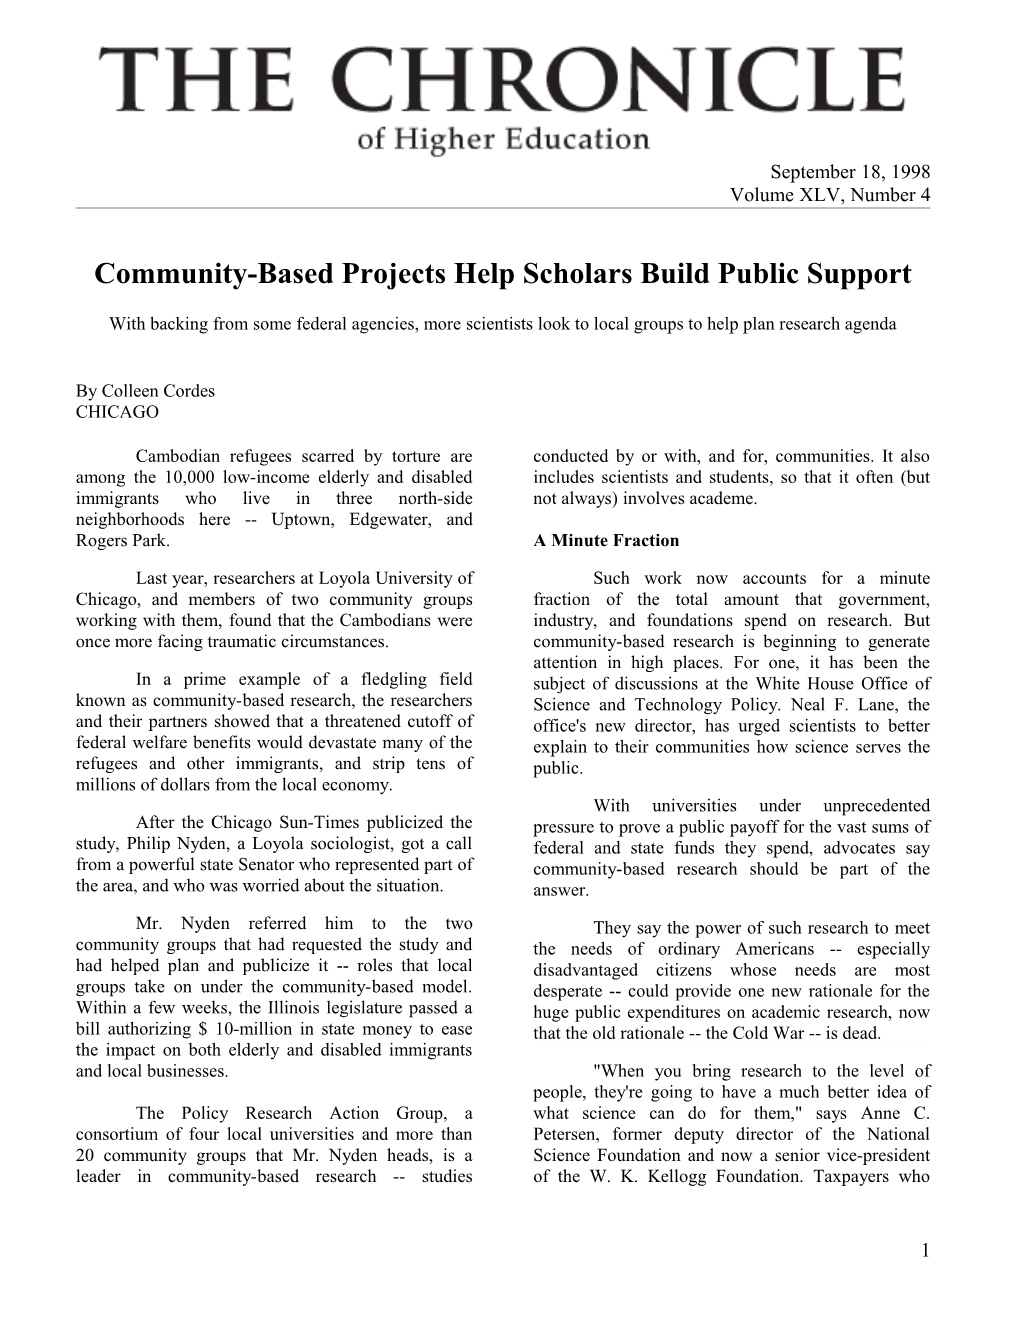 Community-Based Projects Help Scholars Build Public Support